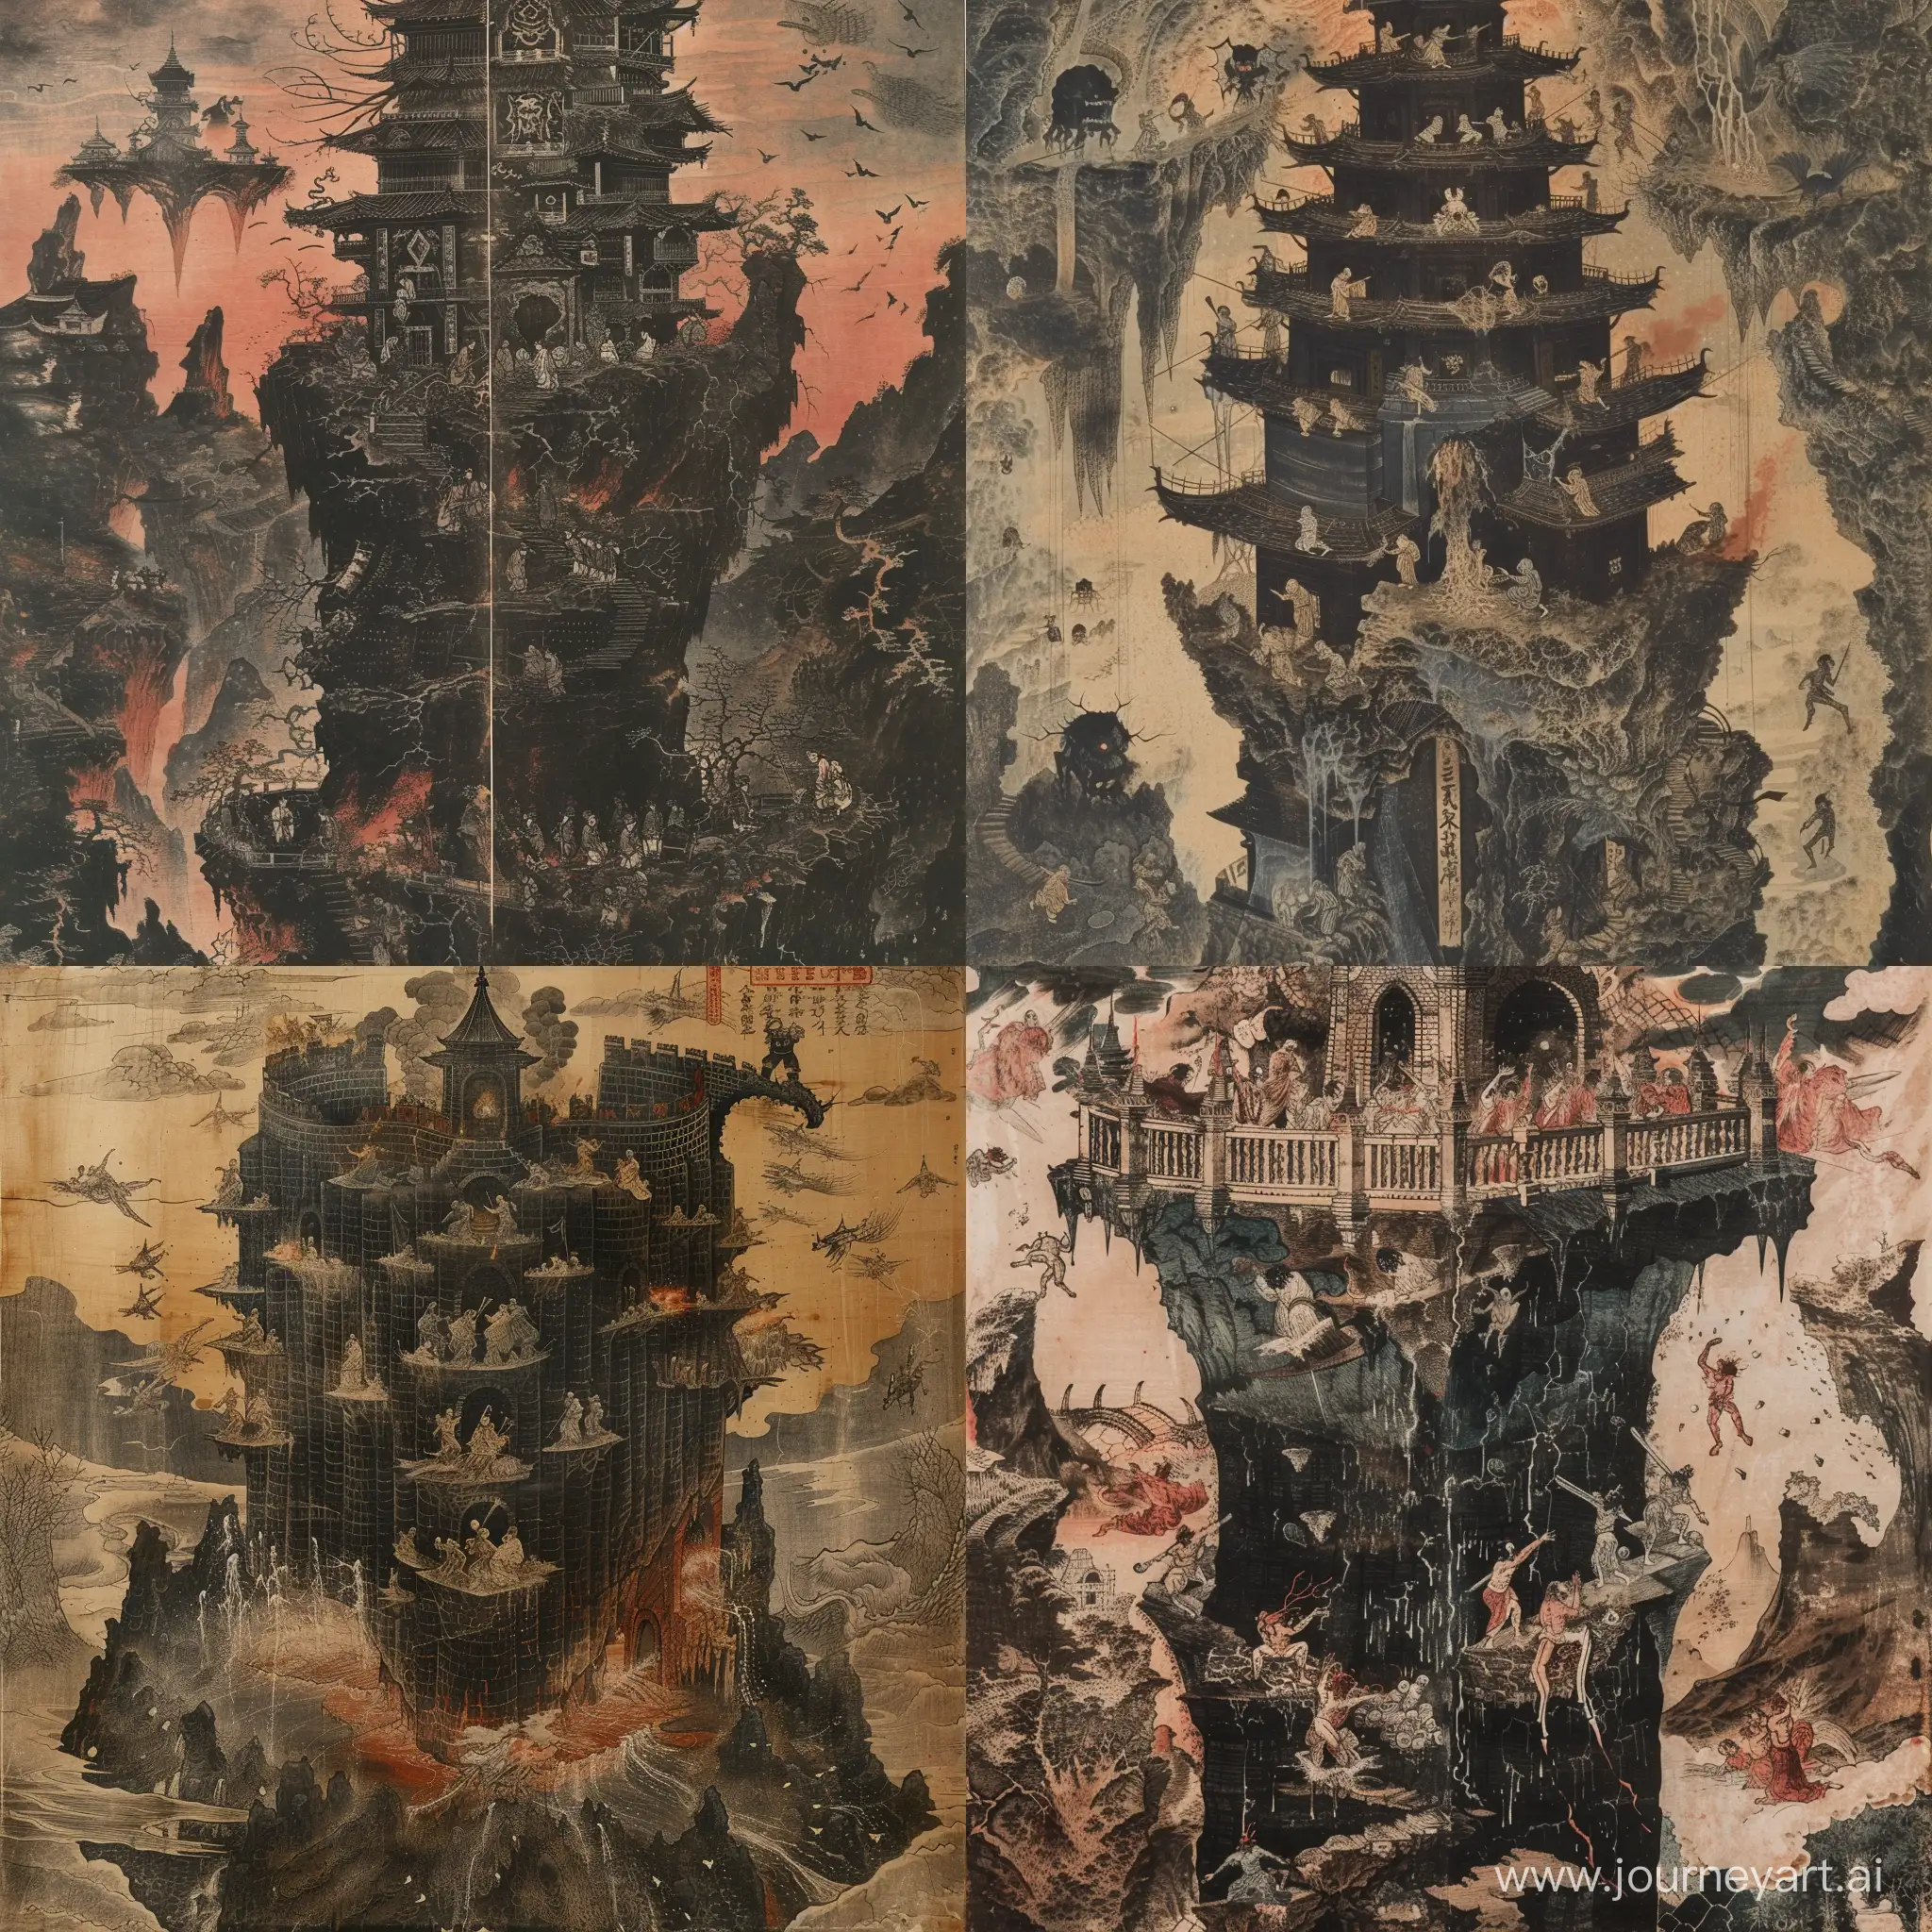 A towering fortress carved from black stone, perched on the edge of a bottomless abyss, its walls echoing with the screams of tortured souls, sinners are getting punished by an evil being,  Ukiyo-E painting style, woodblock prints, vintage, japanese style, edo period, detailed